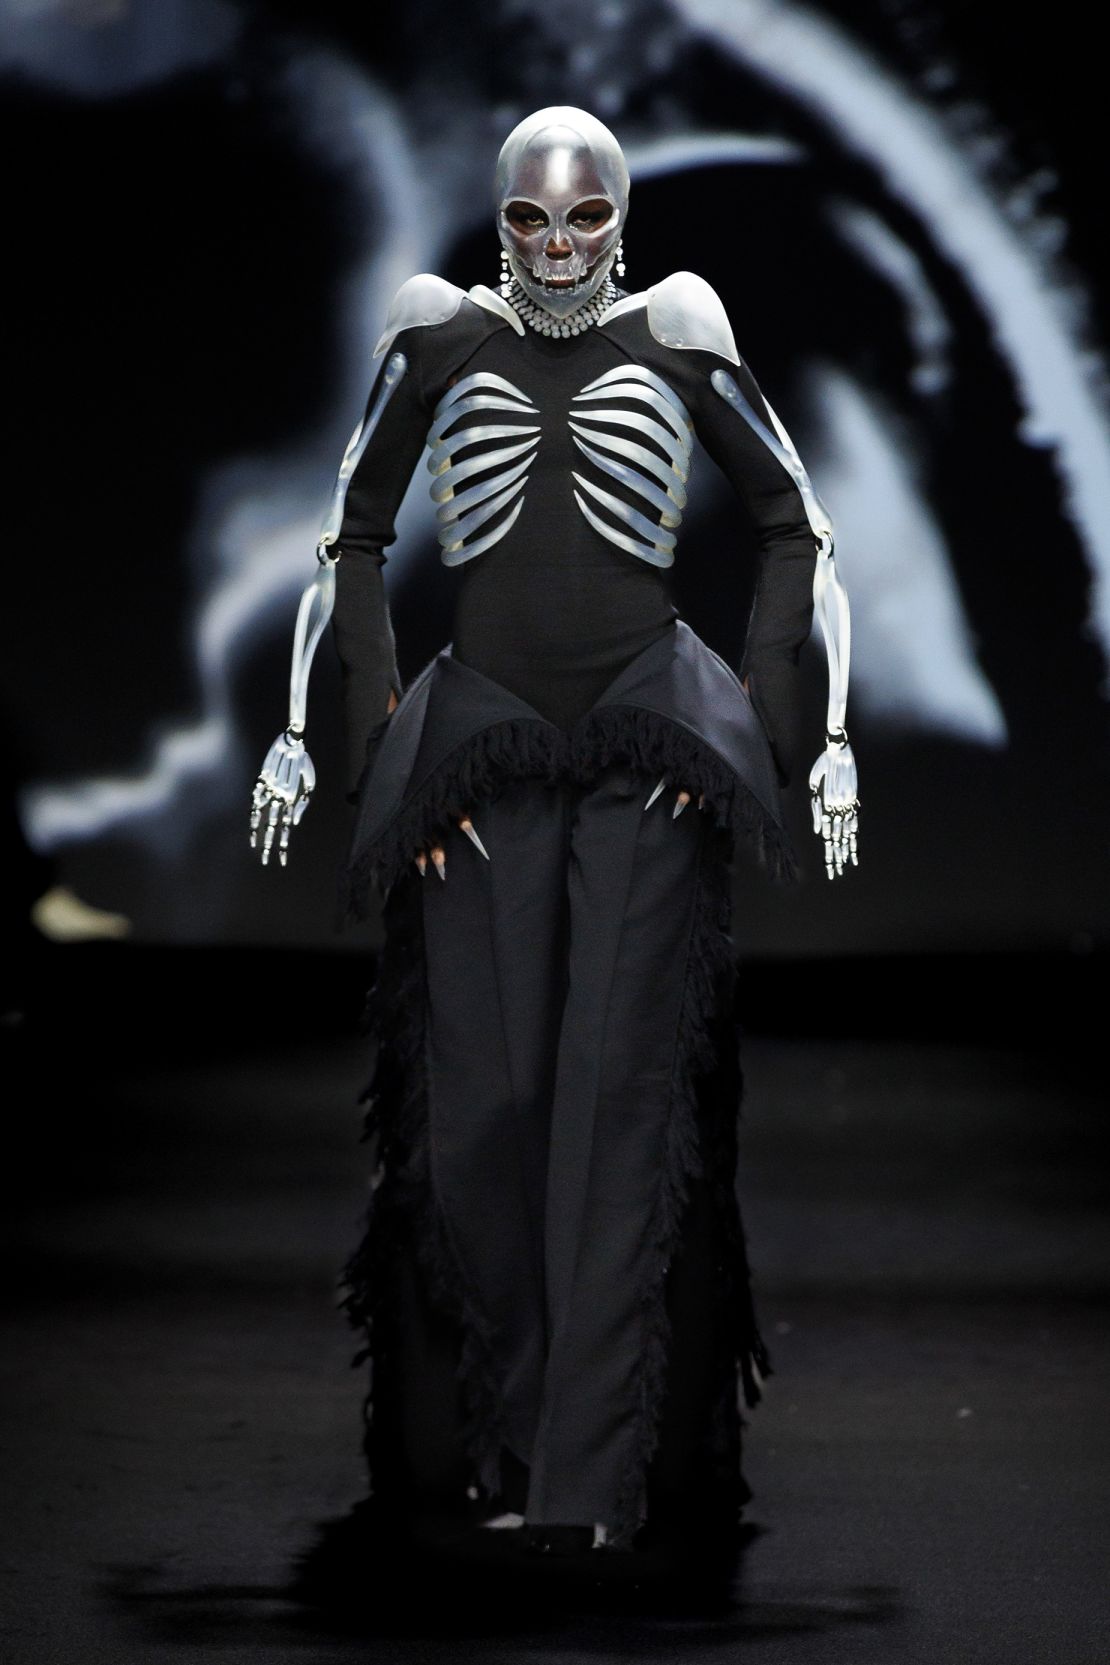 Skull masks were a morbid conclusion to Robert Wun's sartorial musing on the lifecycle.